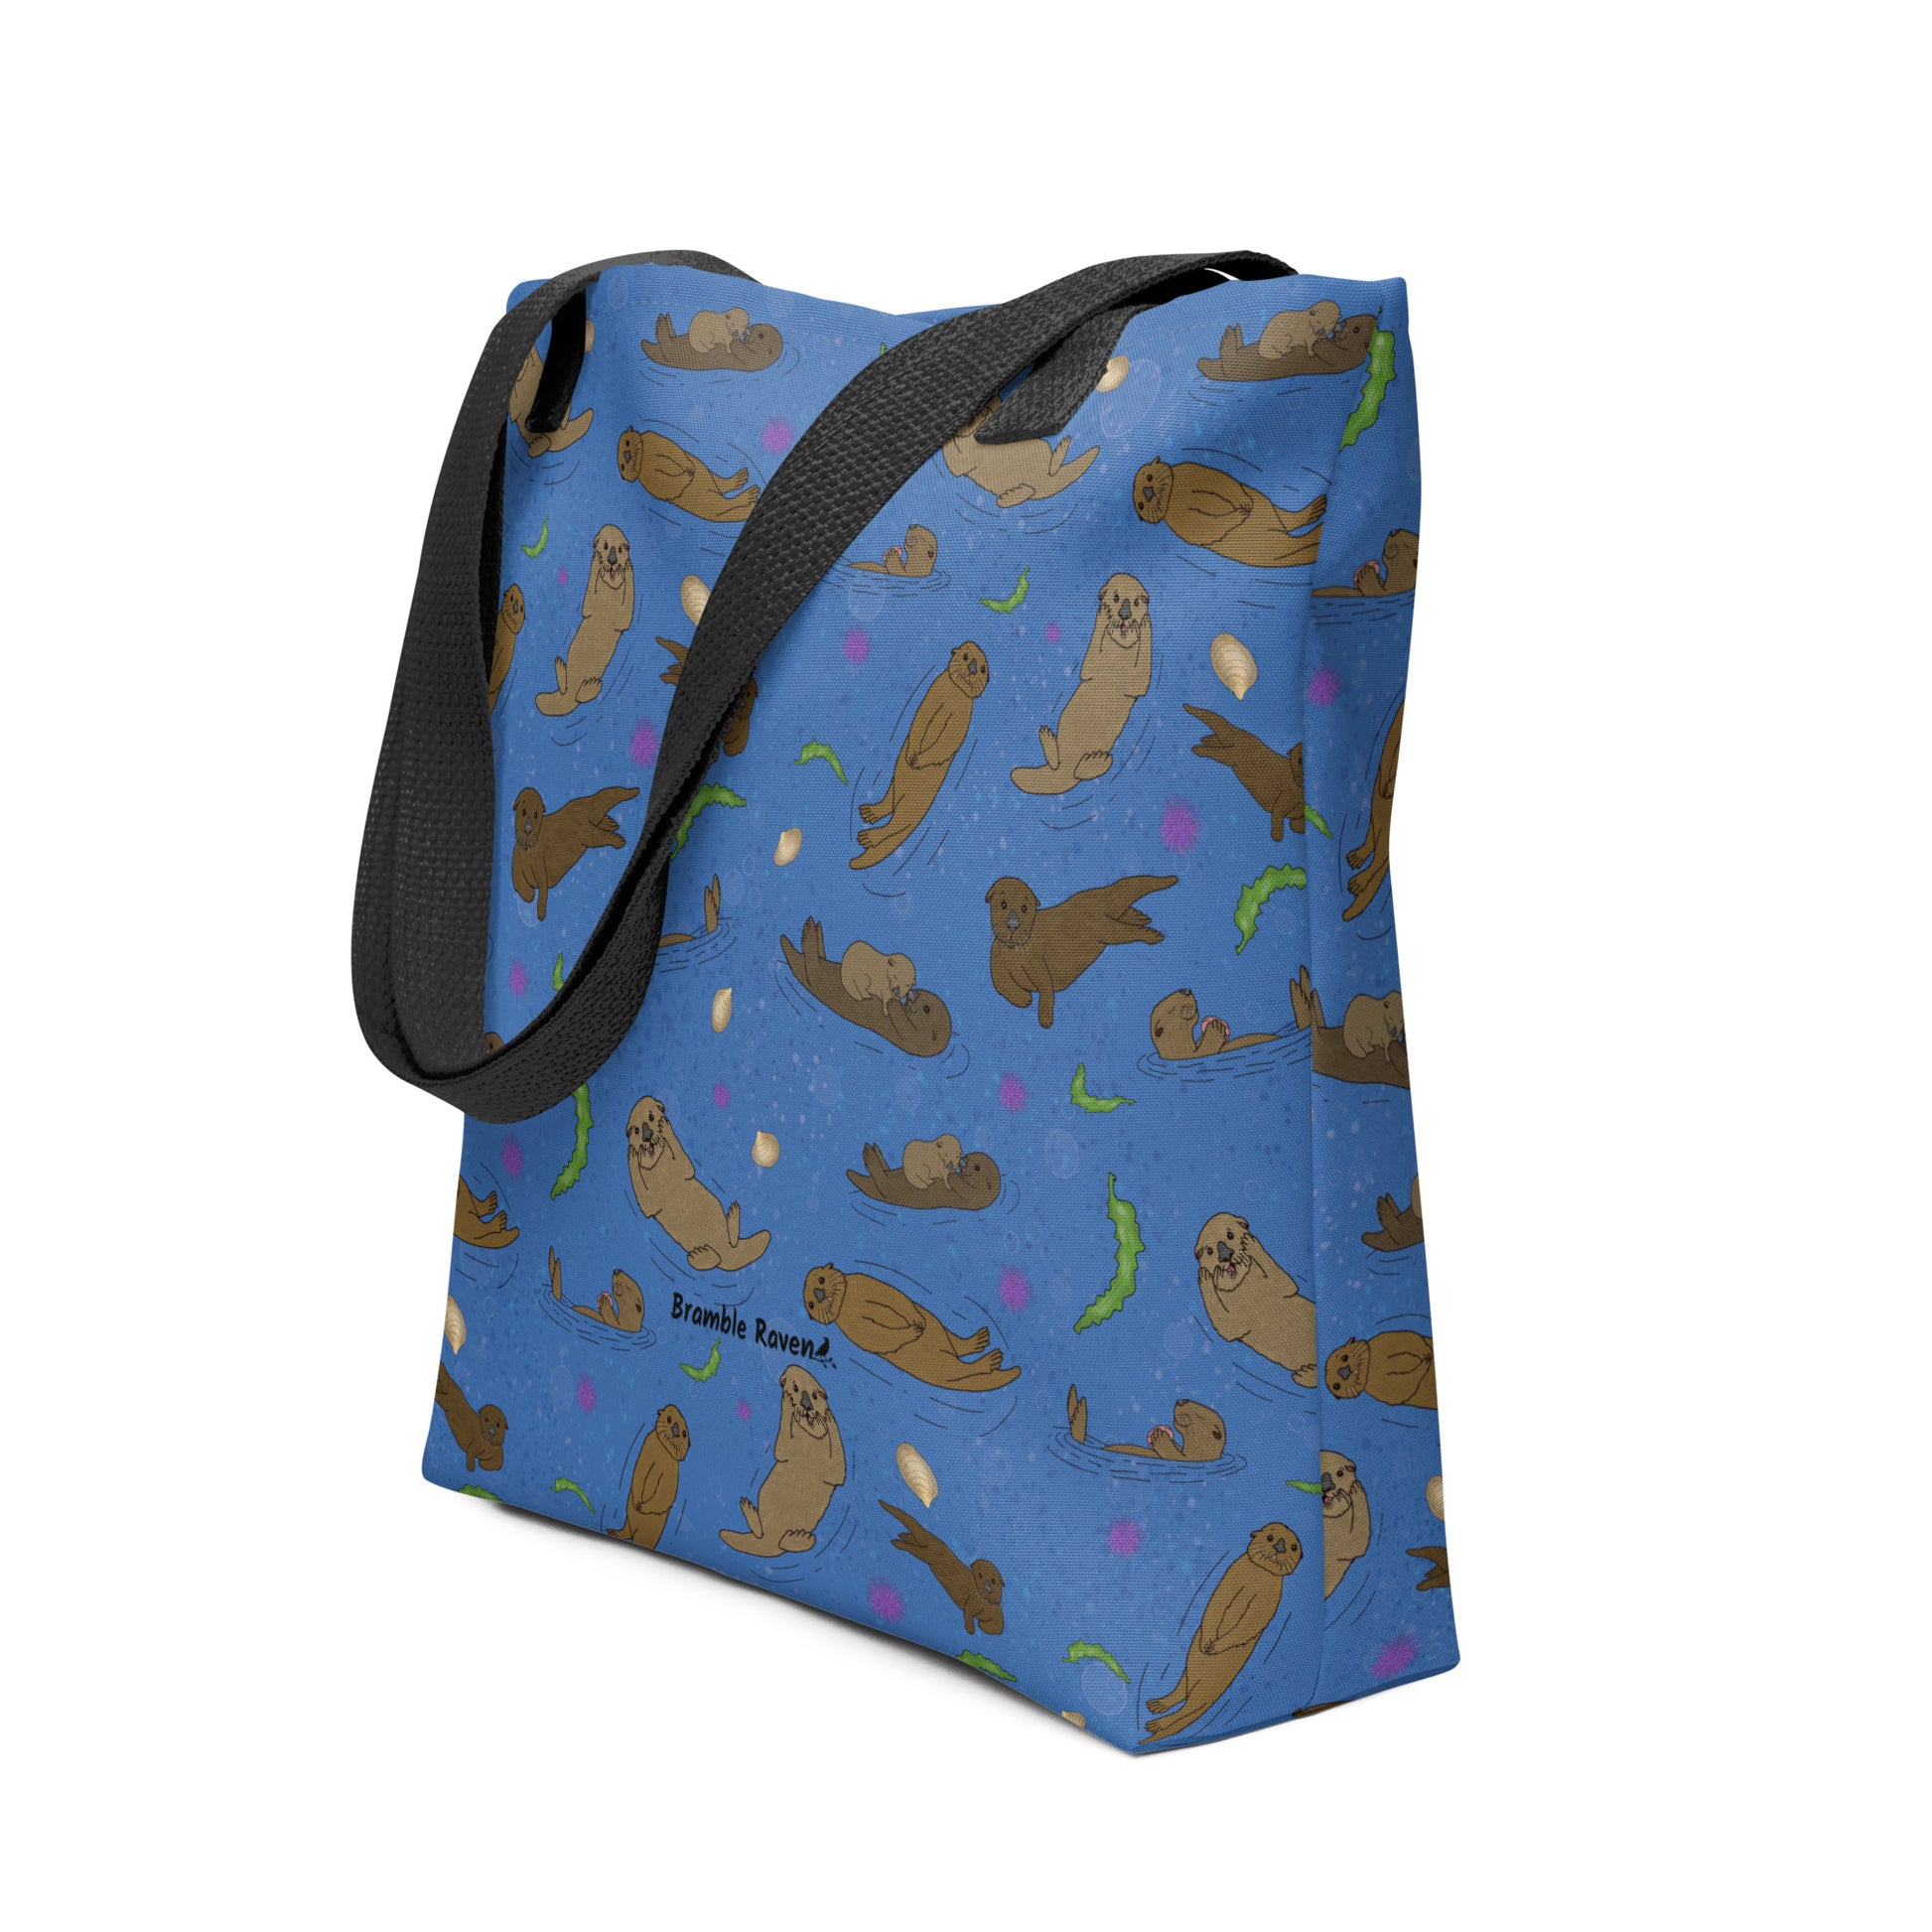 15 by 15 inch polyester tote bag with dual black cotton bull denim handles. It has a patterned design of sea otters, seashells, seaweed and sea urchins on a blue background. Shown standing upright with boxed corners.